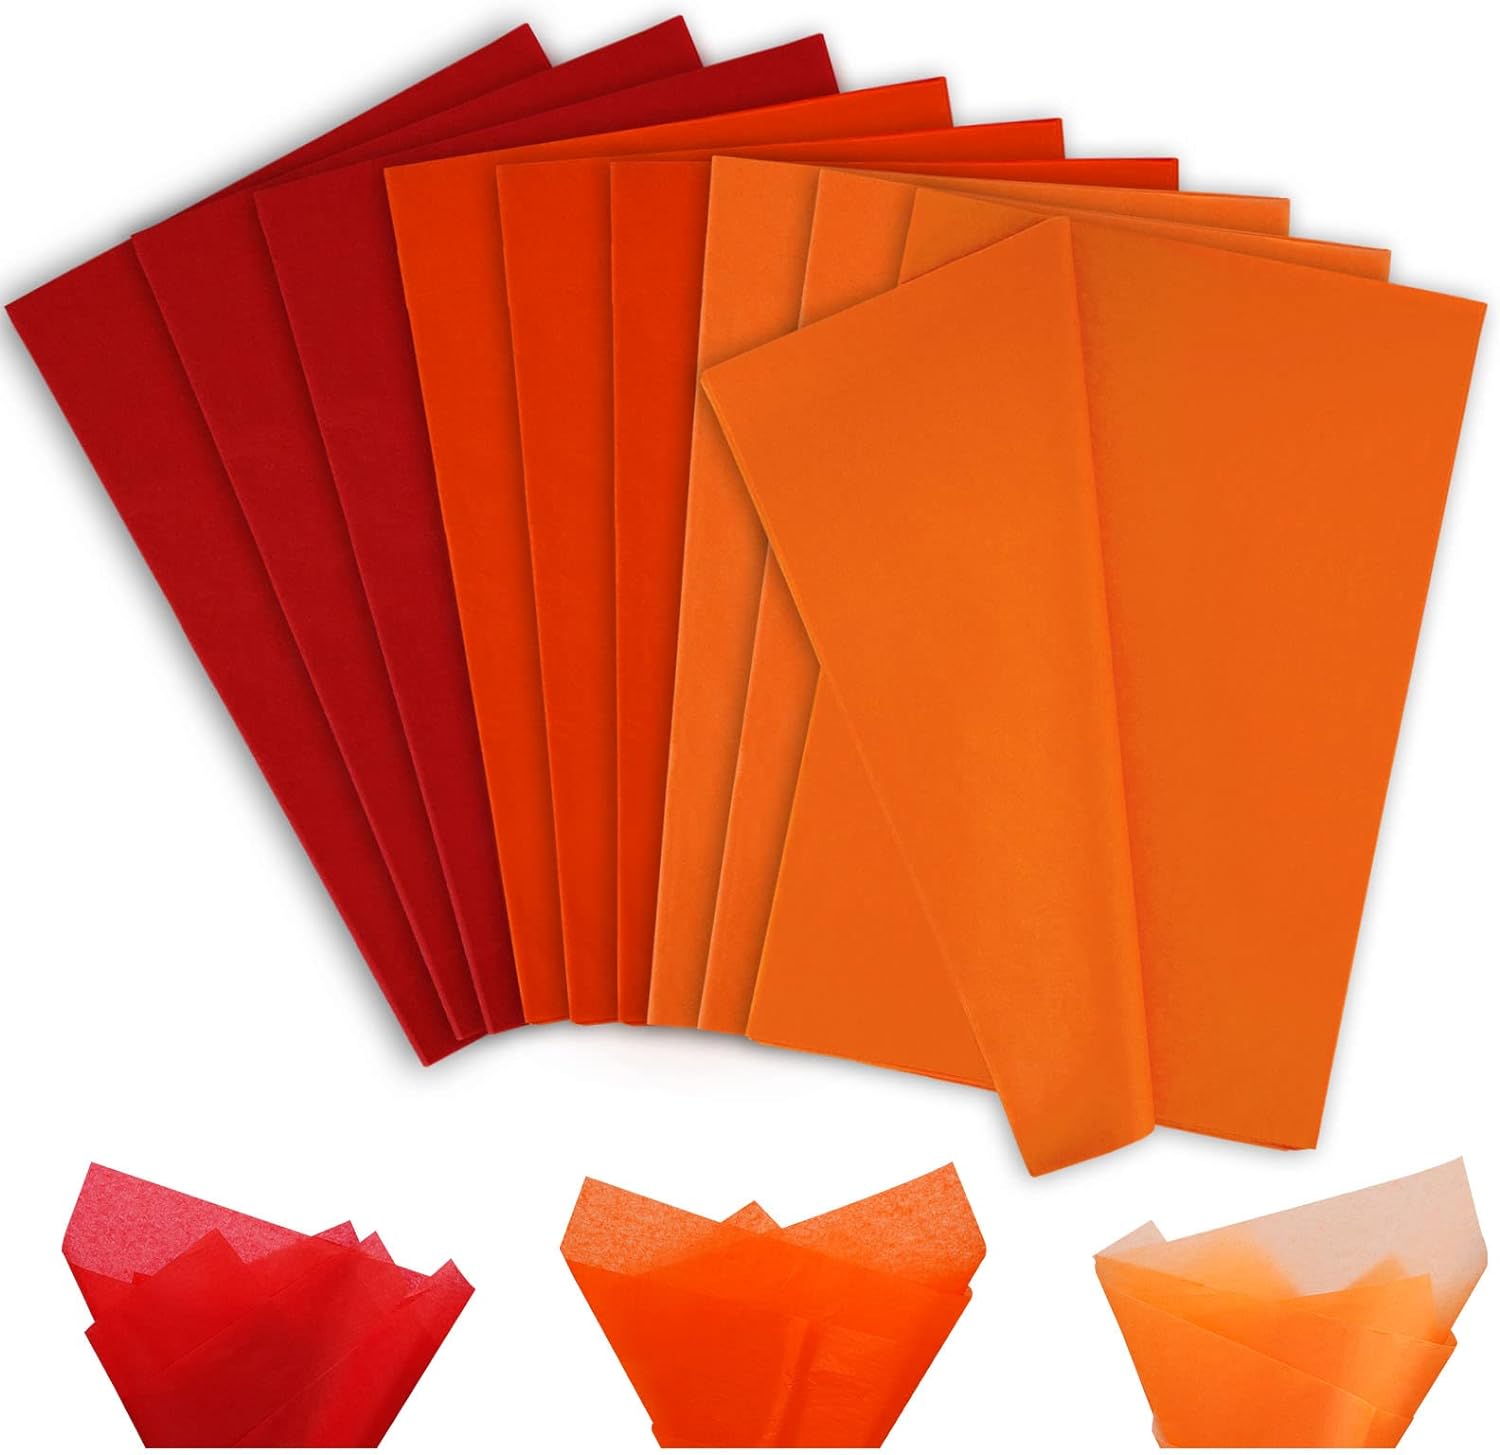 Whaline 120 Sheet Assorted Red Orange Series Tissue Paper Gift Wrapping Tissue Paper Art Paper Crafts for DIY Birthday Autumn Wedding Holiday Paper Flower, 3 Colors, 15 x 20 inch